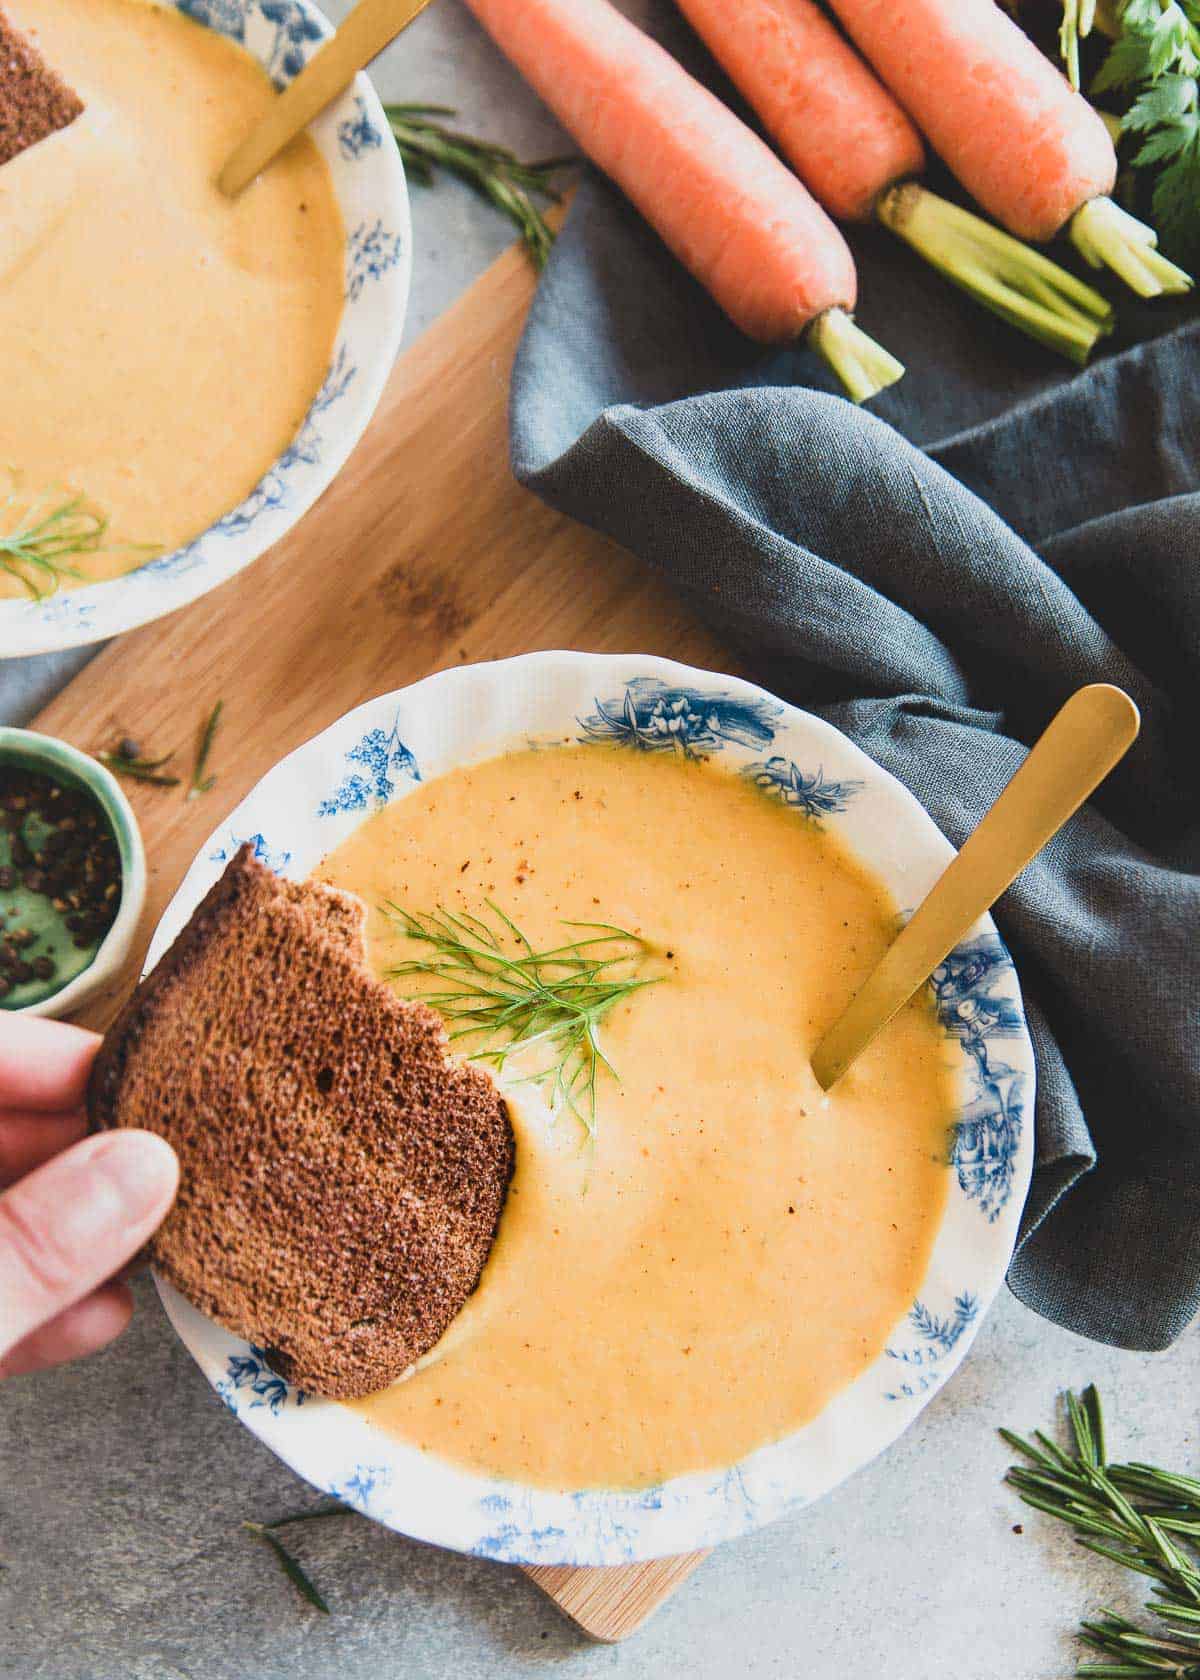 Carrots, fennel and white beans make this a creamy and hearty vegetarian spring soup.